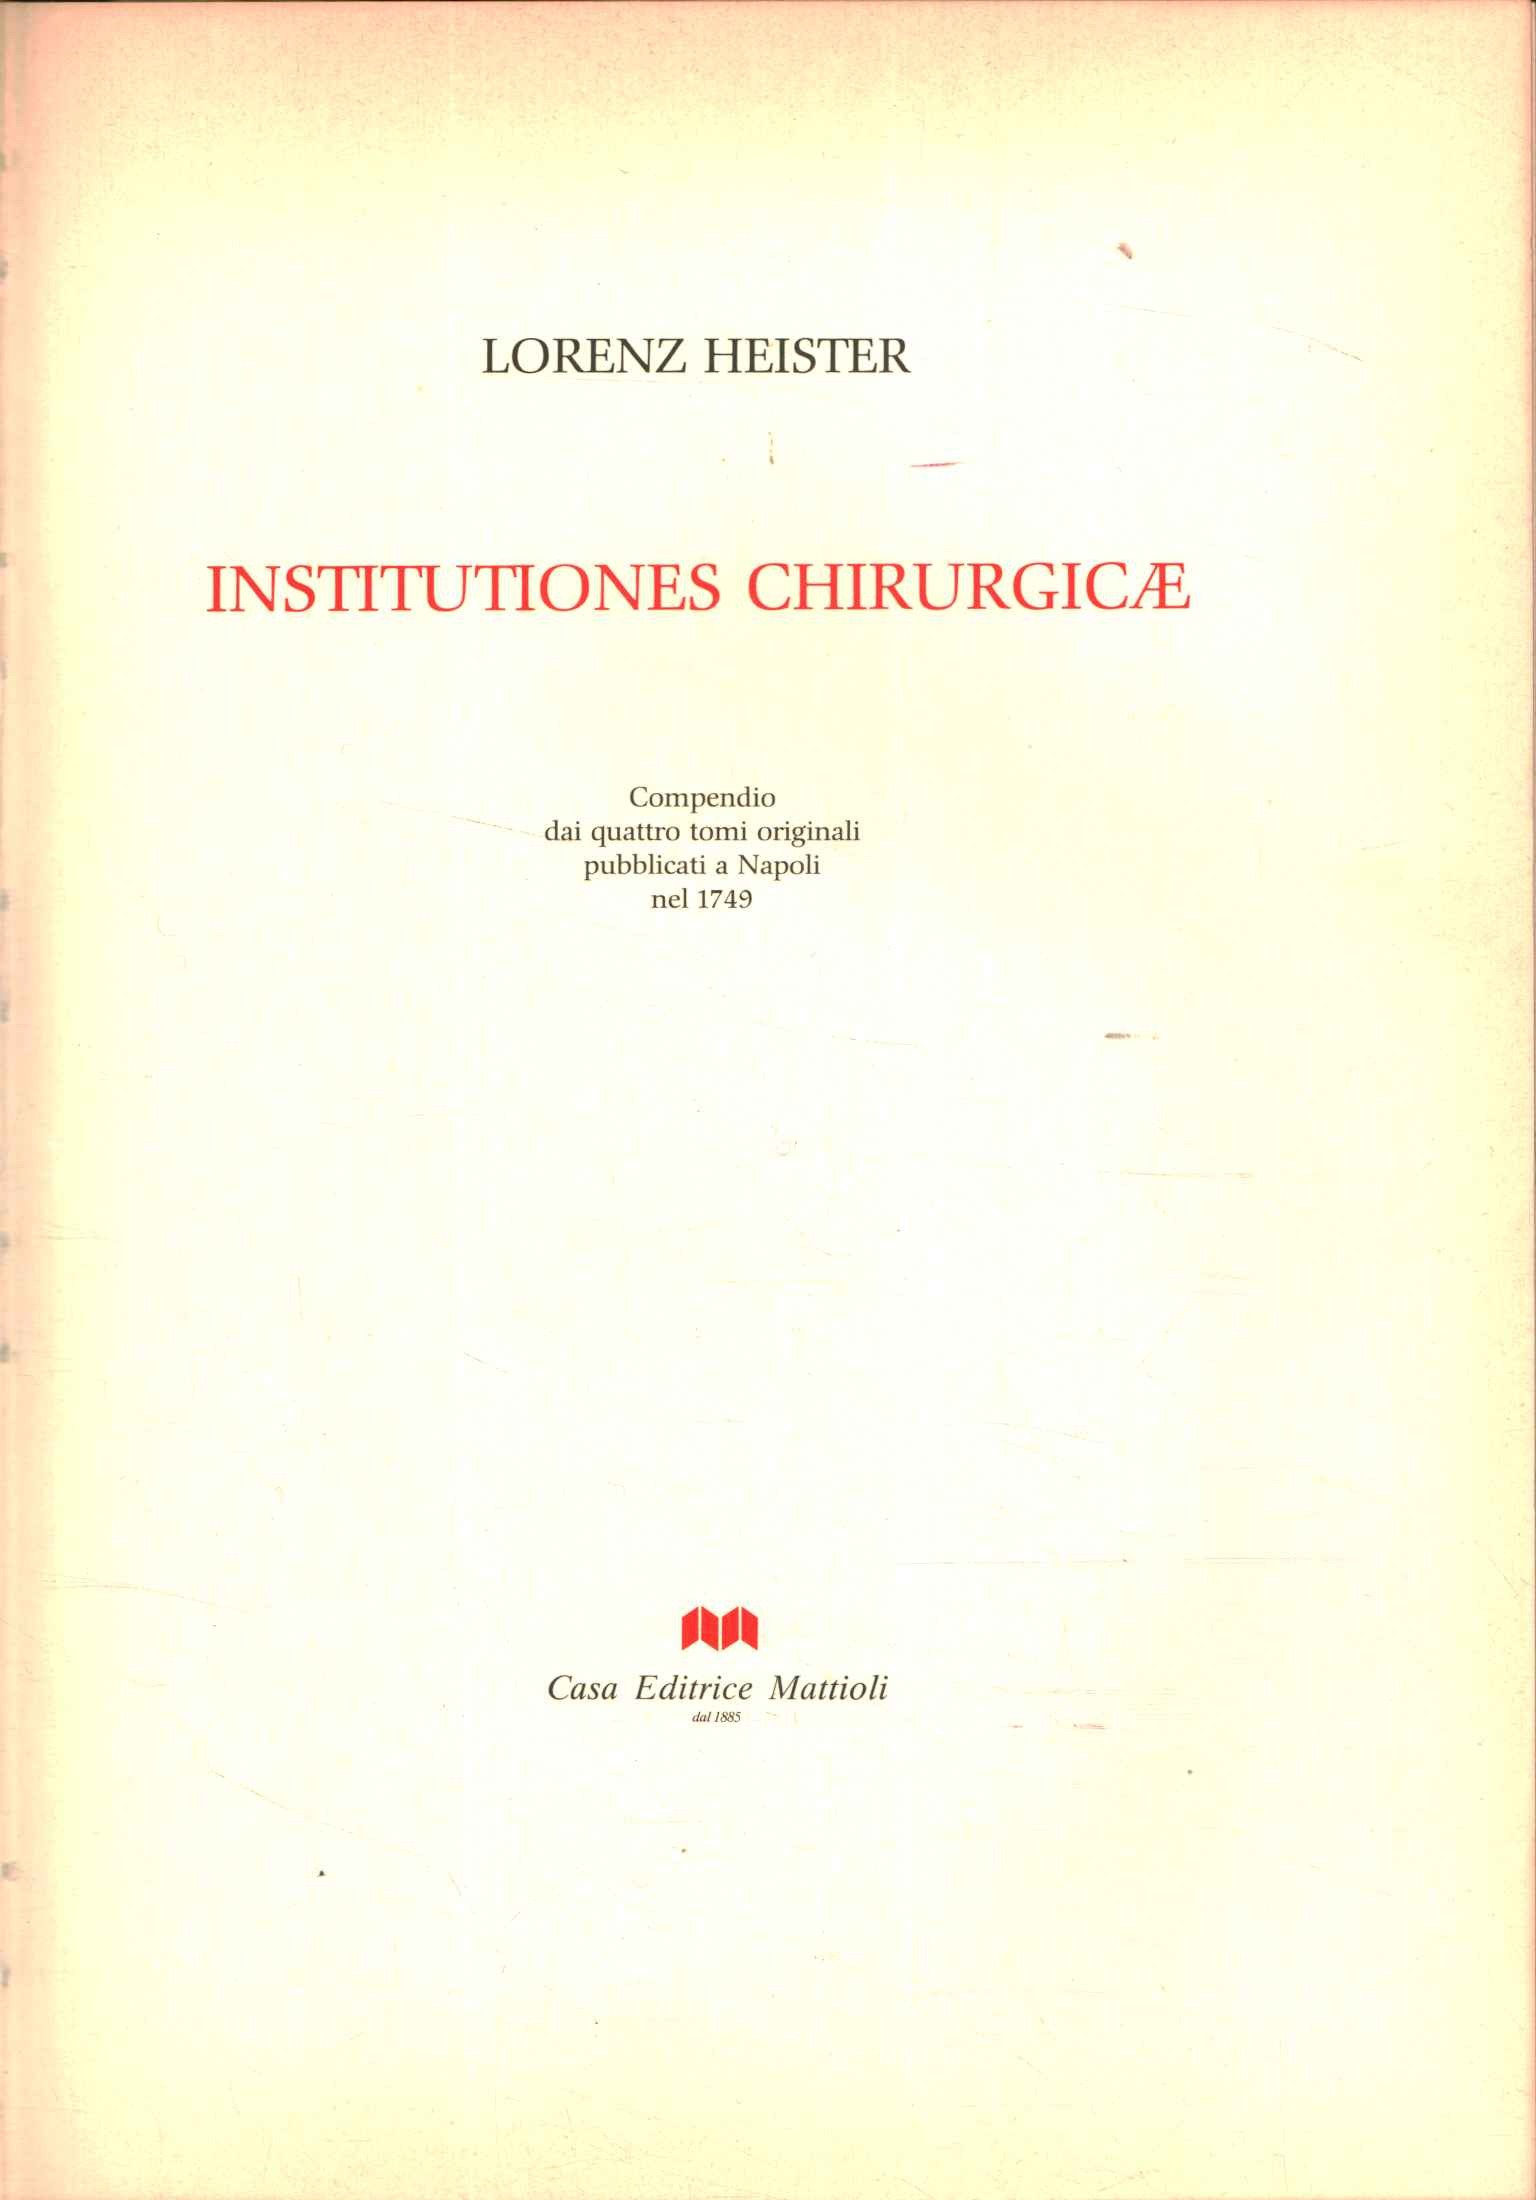 Livres - Science - Médecine, Institutions chirurgicales